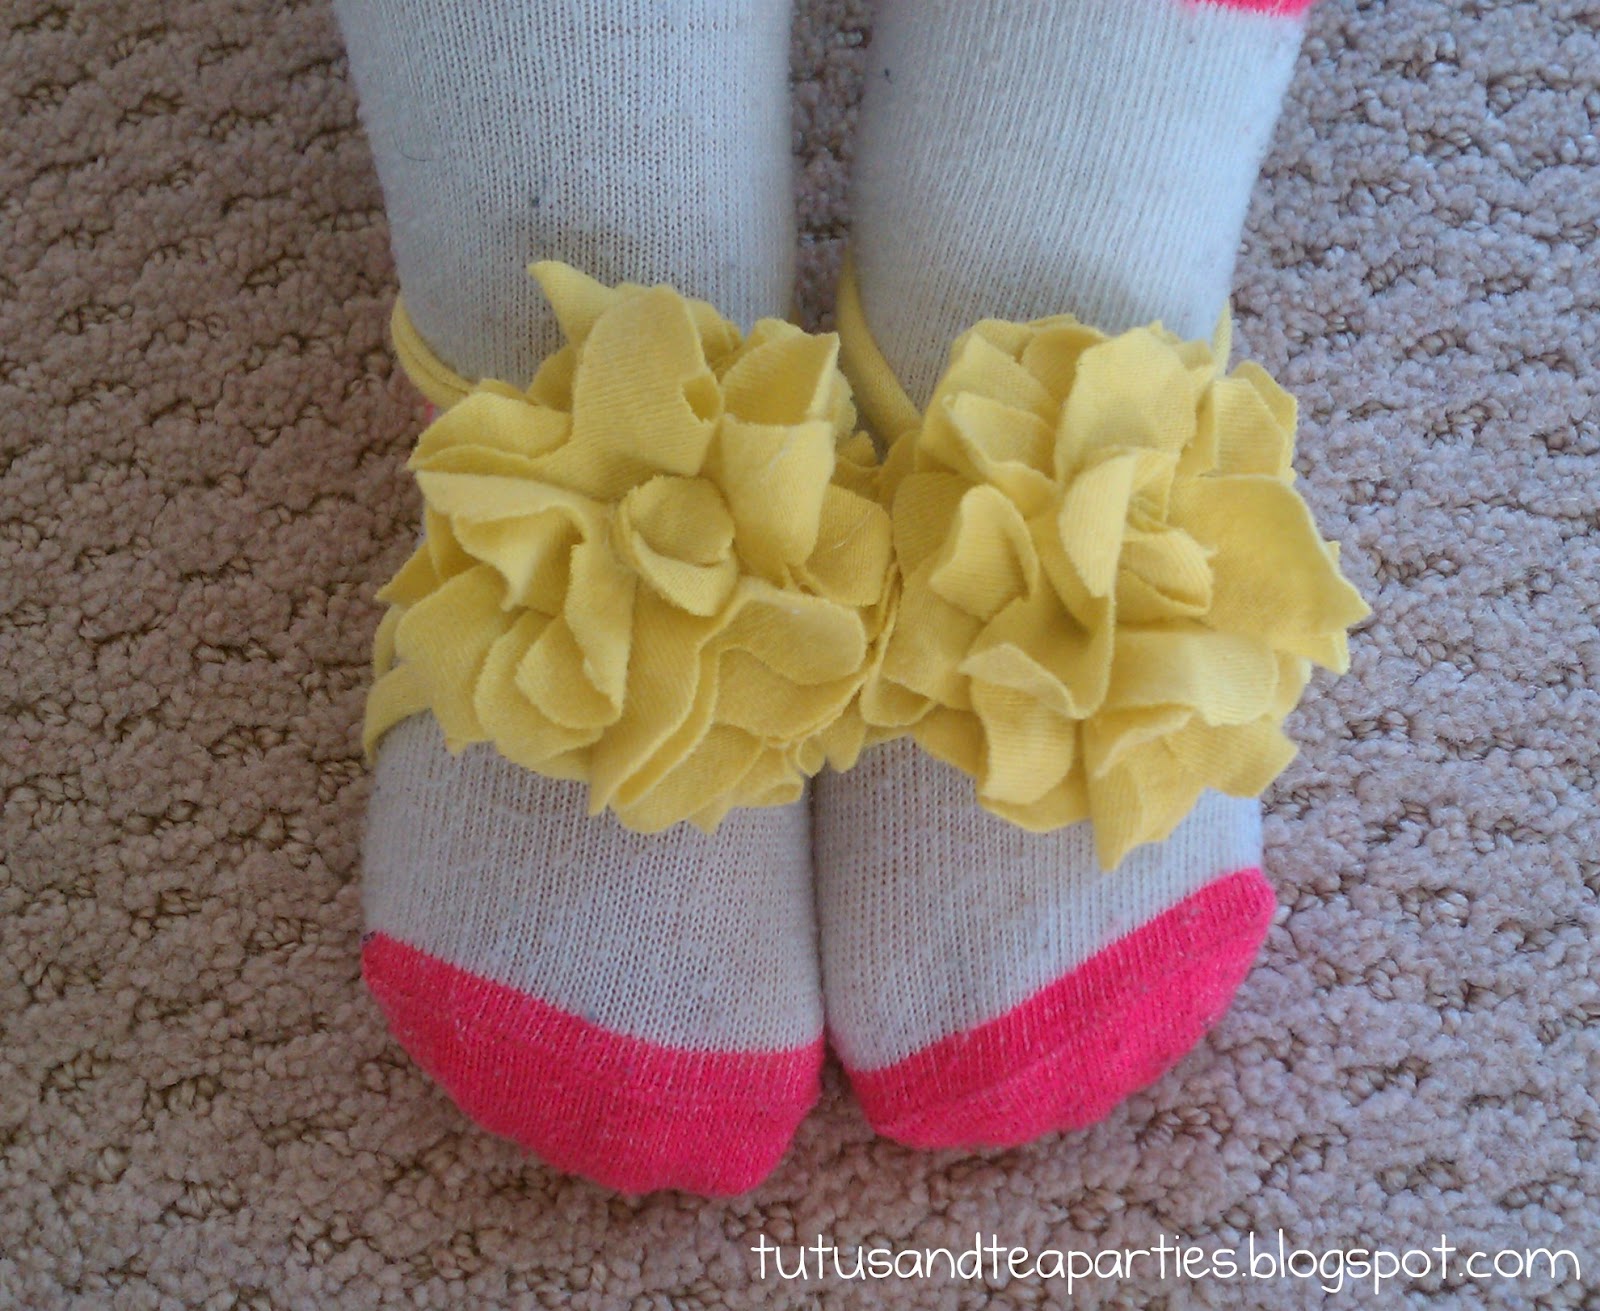 Tutus and Tea Parties: DIY T-shirt Upcycle to Barefoot Sandals